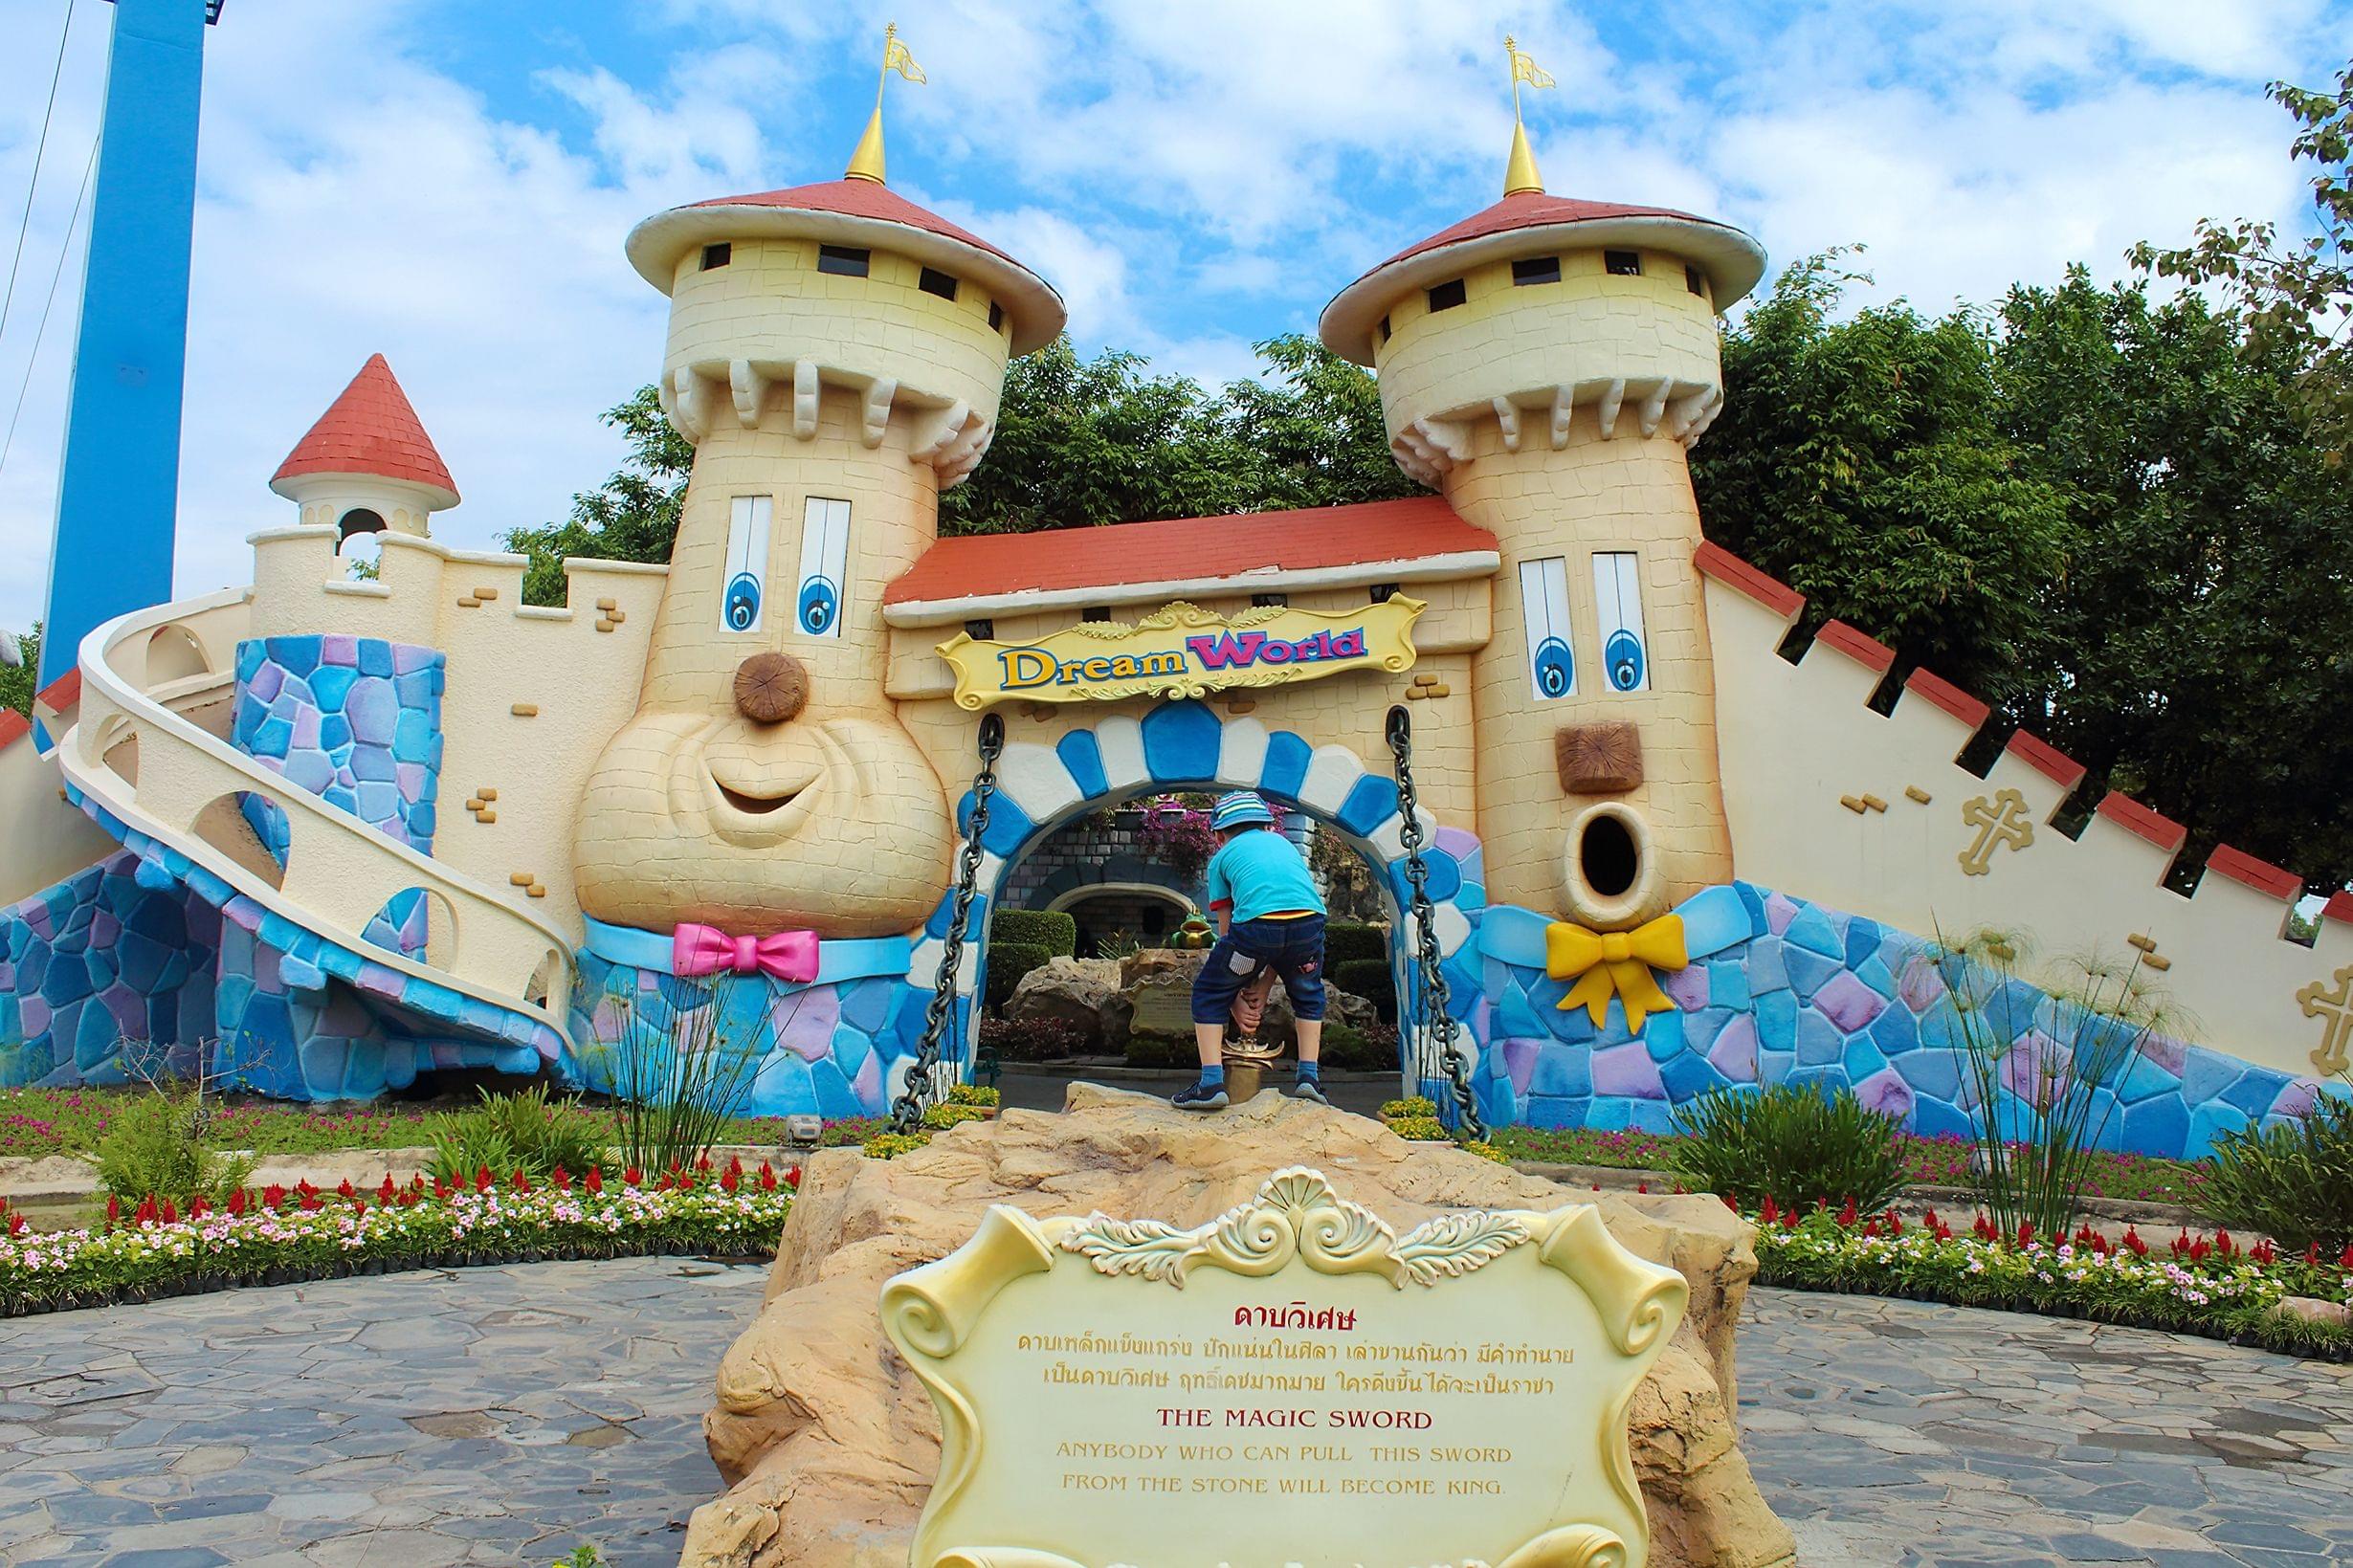 Dream world, Thailand @dreamworldth is about a 45 minutes drive